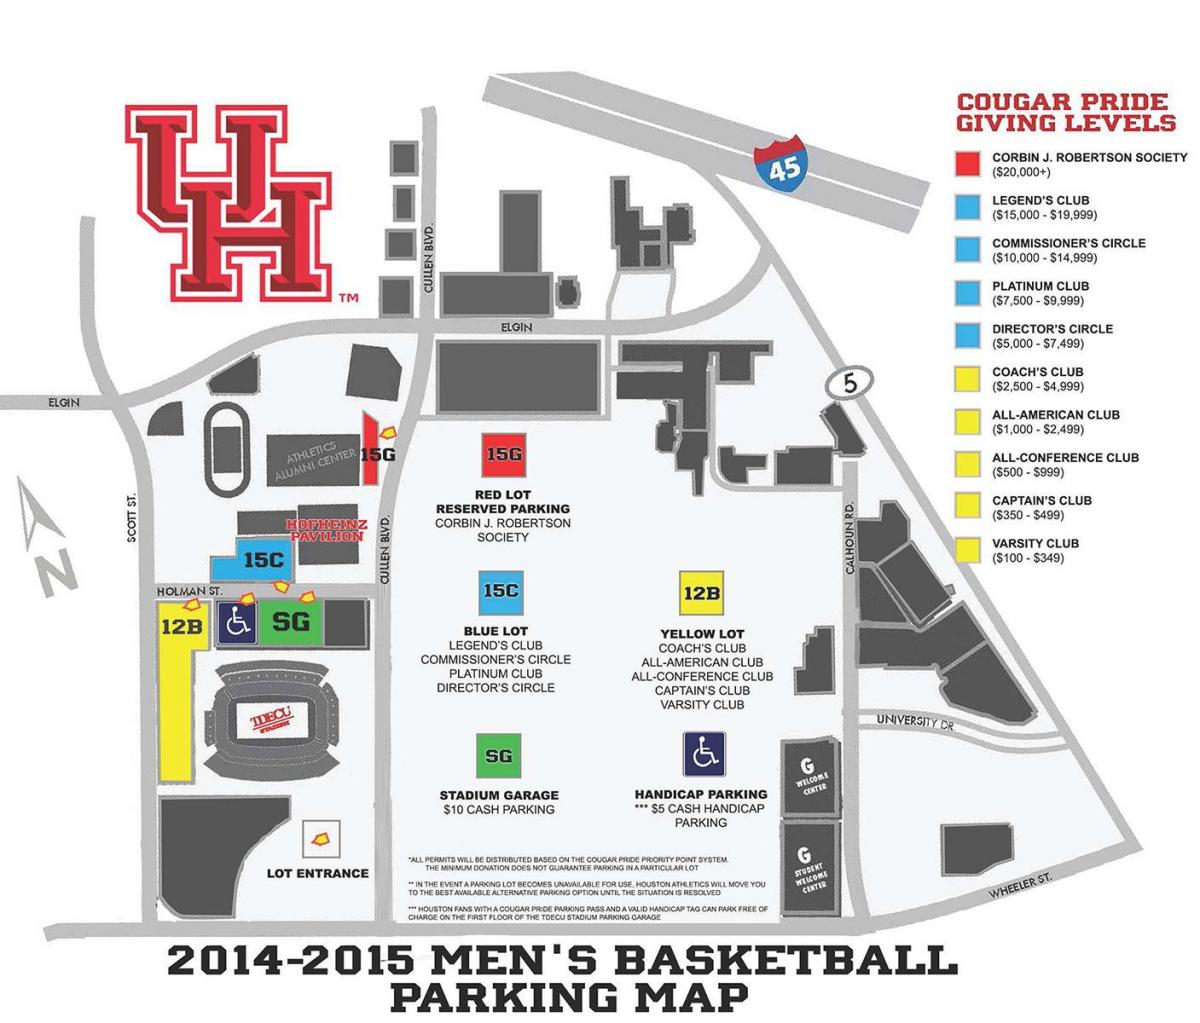 u of h map